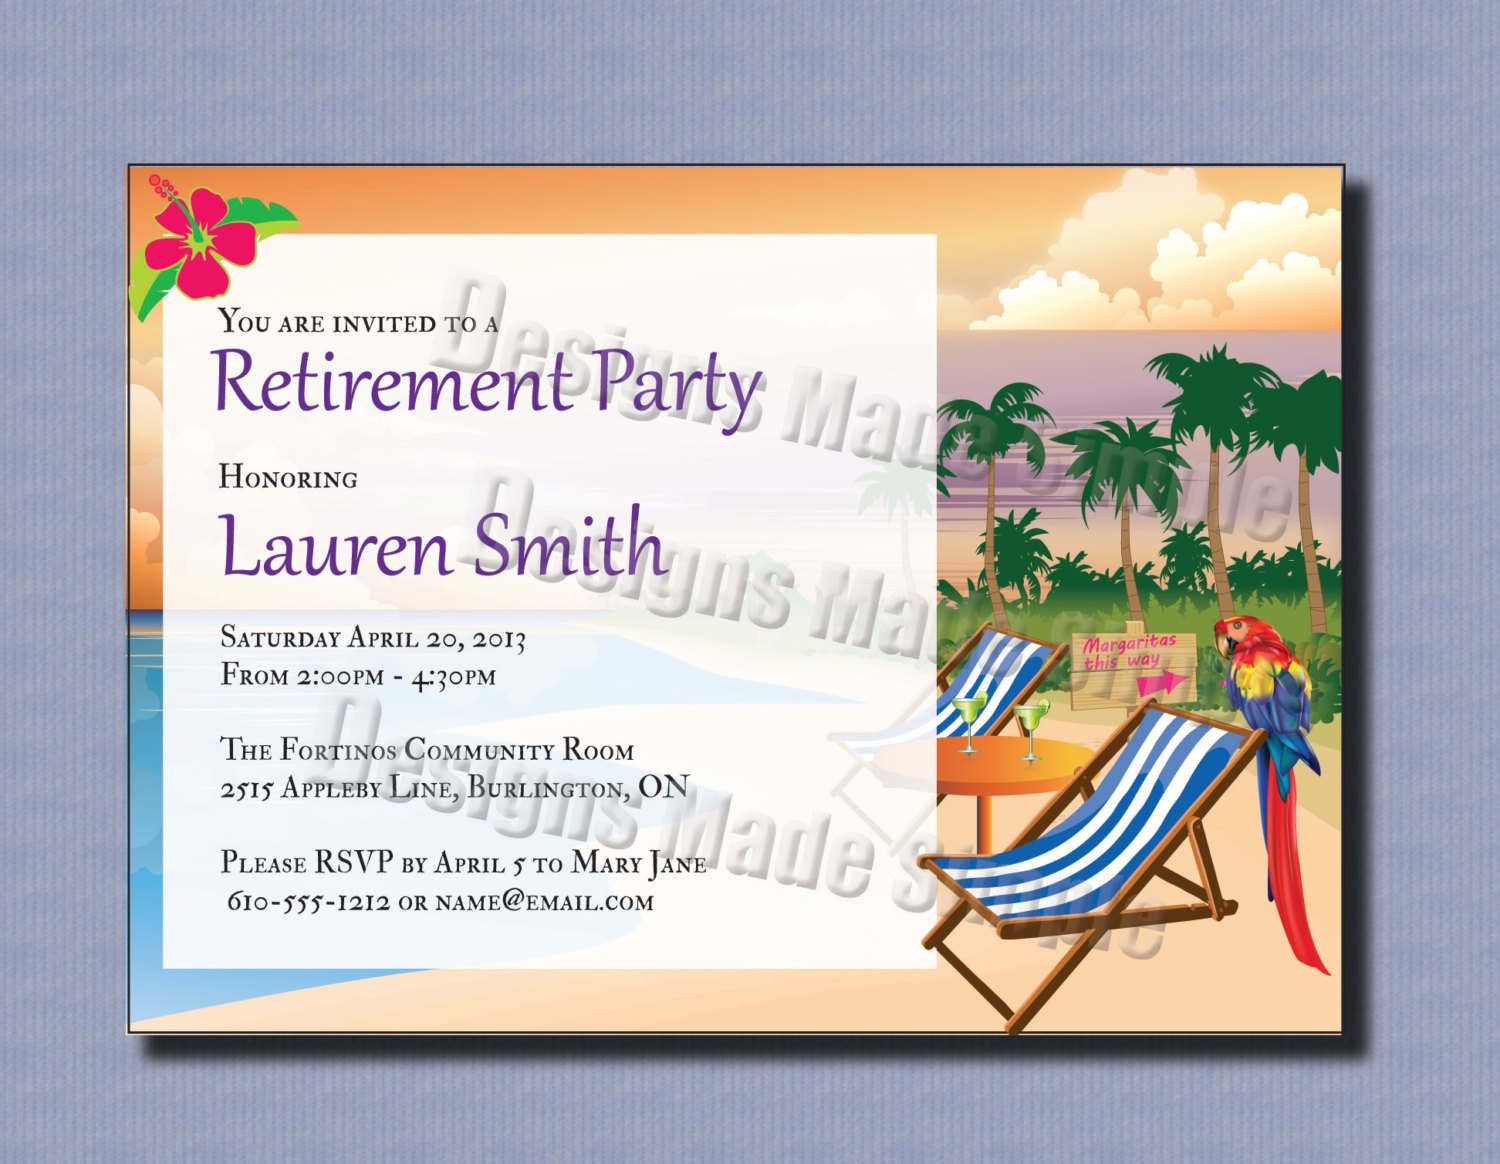 Retirement Party Invitations Template 2xizvtxM Or Cooks Invitation